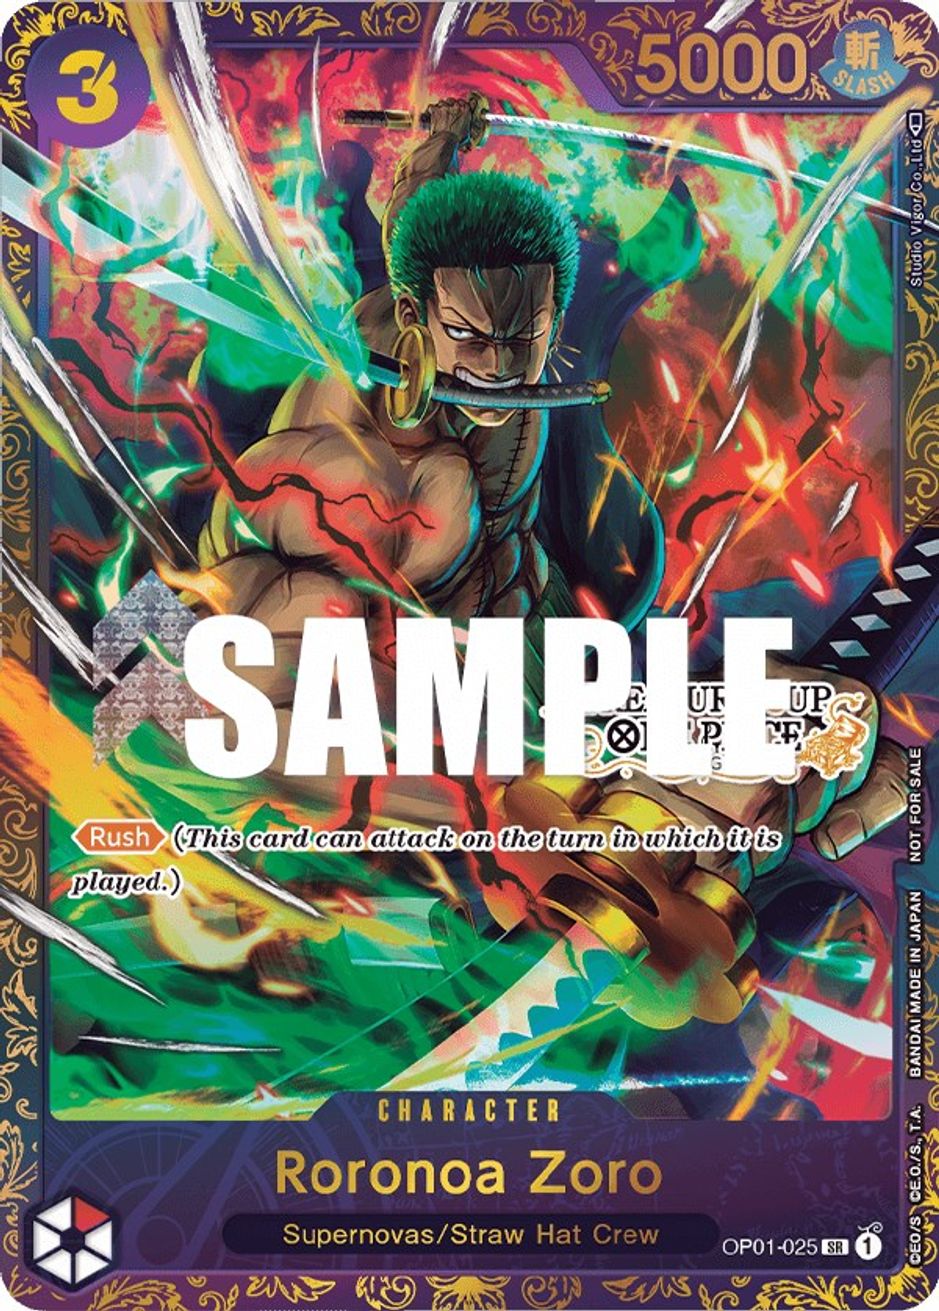 Roronoa Zoro - OP01-025 (Treasure Cup) - One Piece Promotion Cards ...